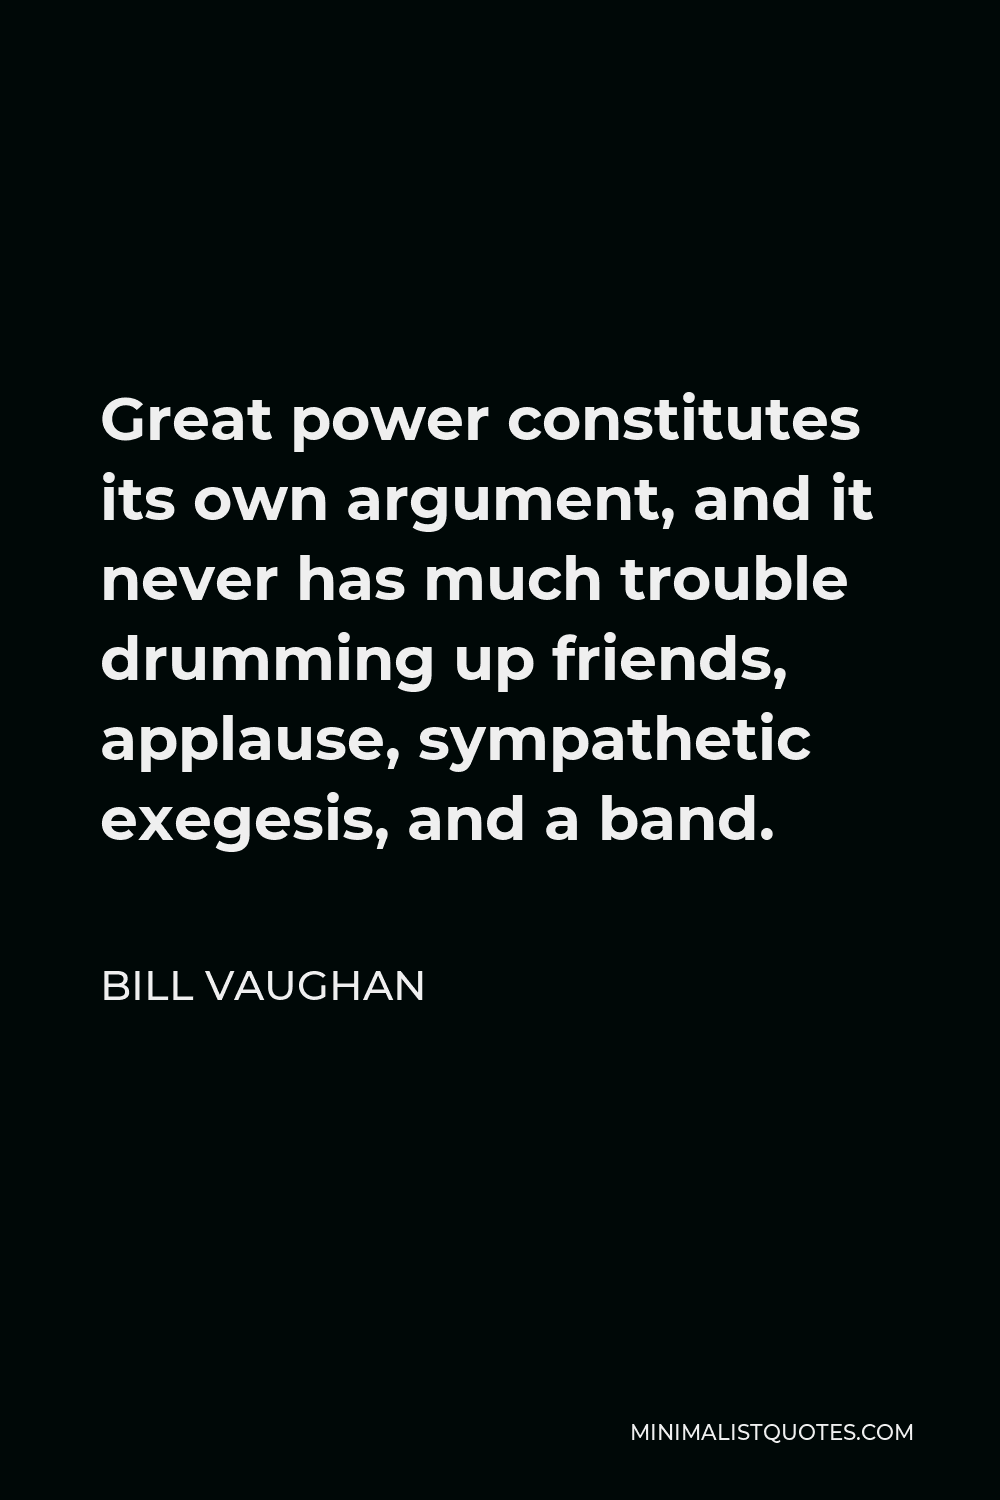 Bill Vaughan Quote - Great power constitutes its own argument, and it never has much trouble drumming up friends, applause, sympathetic exegesis, and a band.